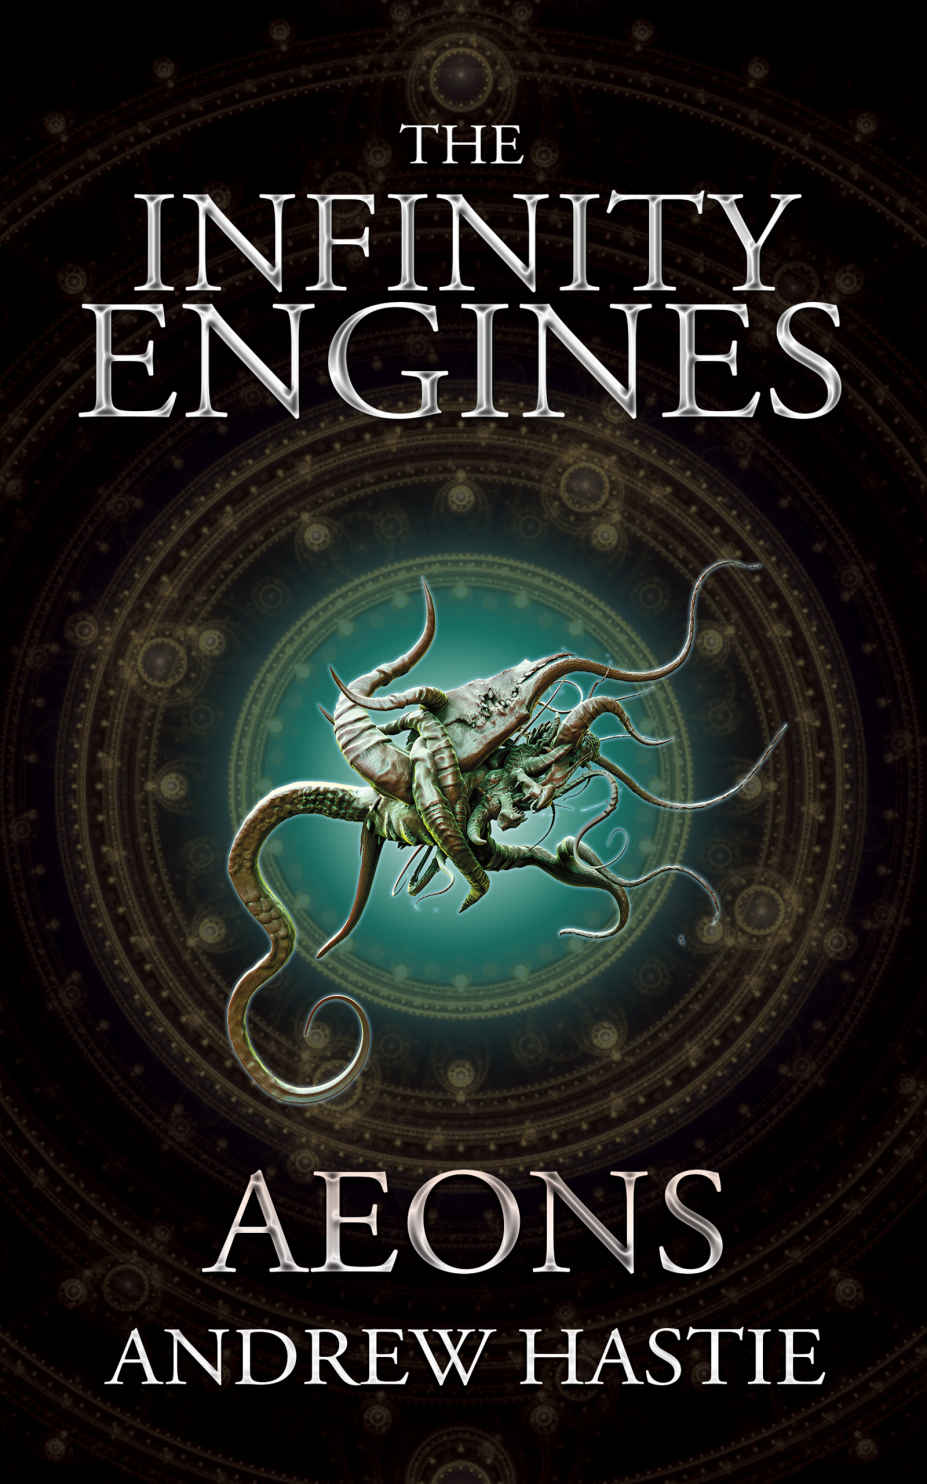 Aeons (The Infinity Engines Book 4)